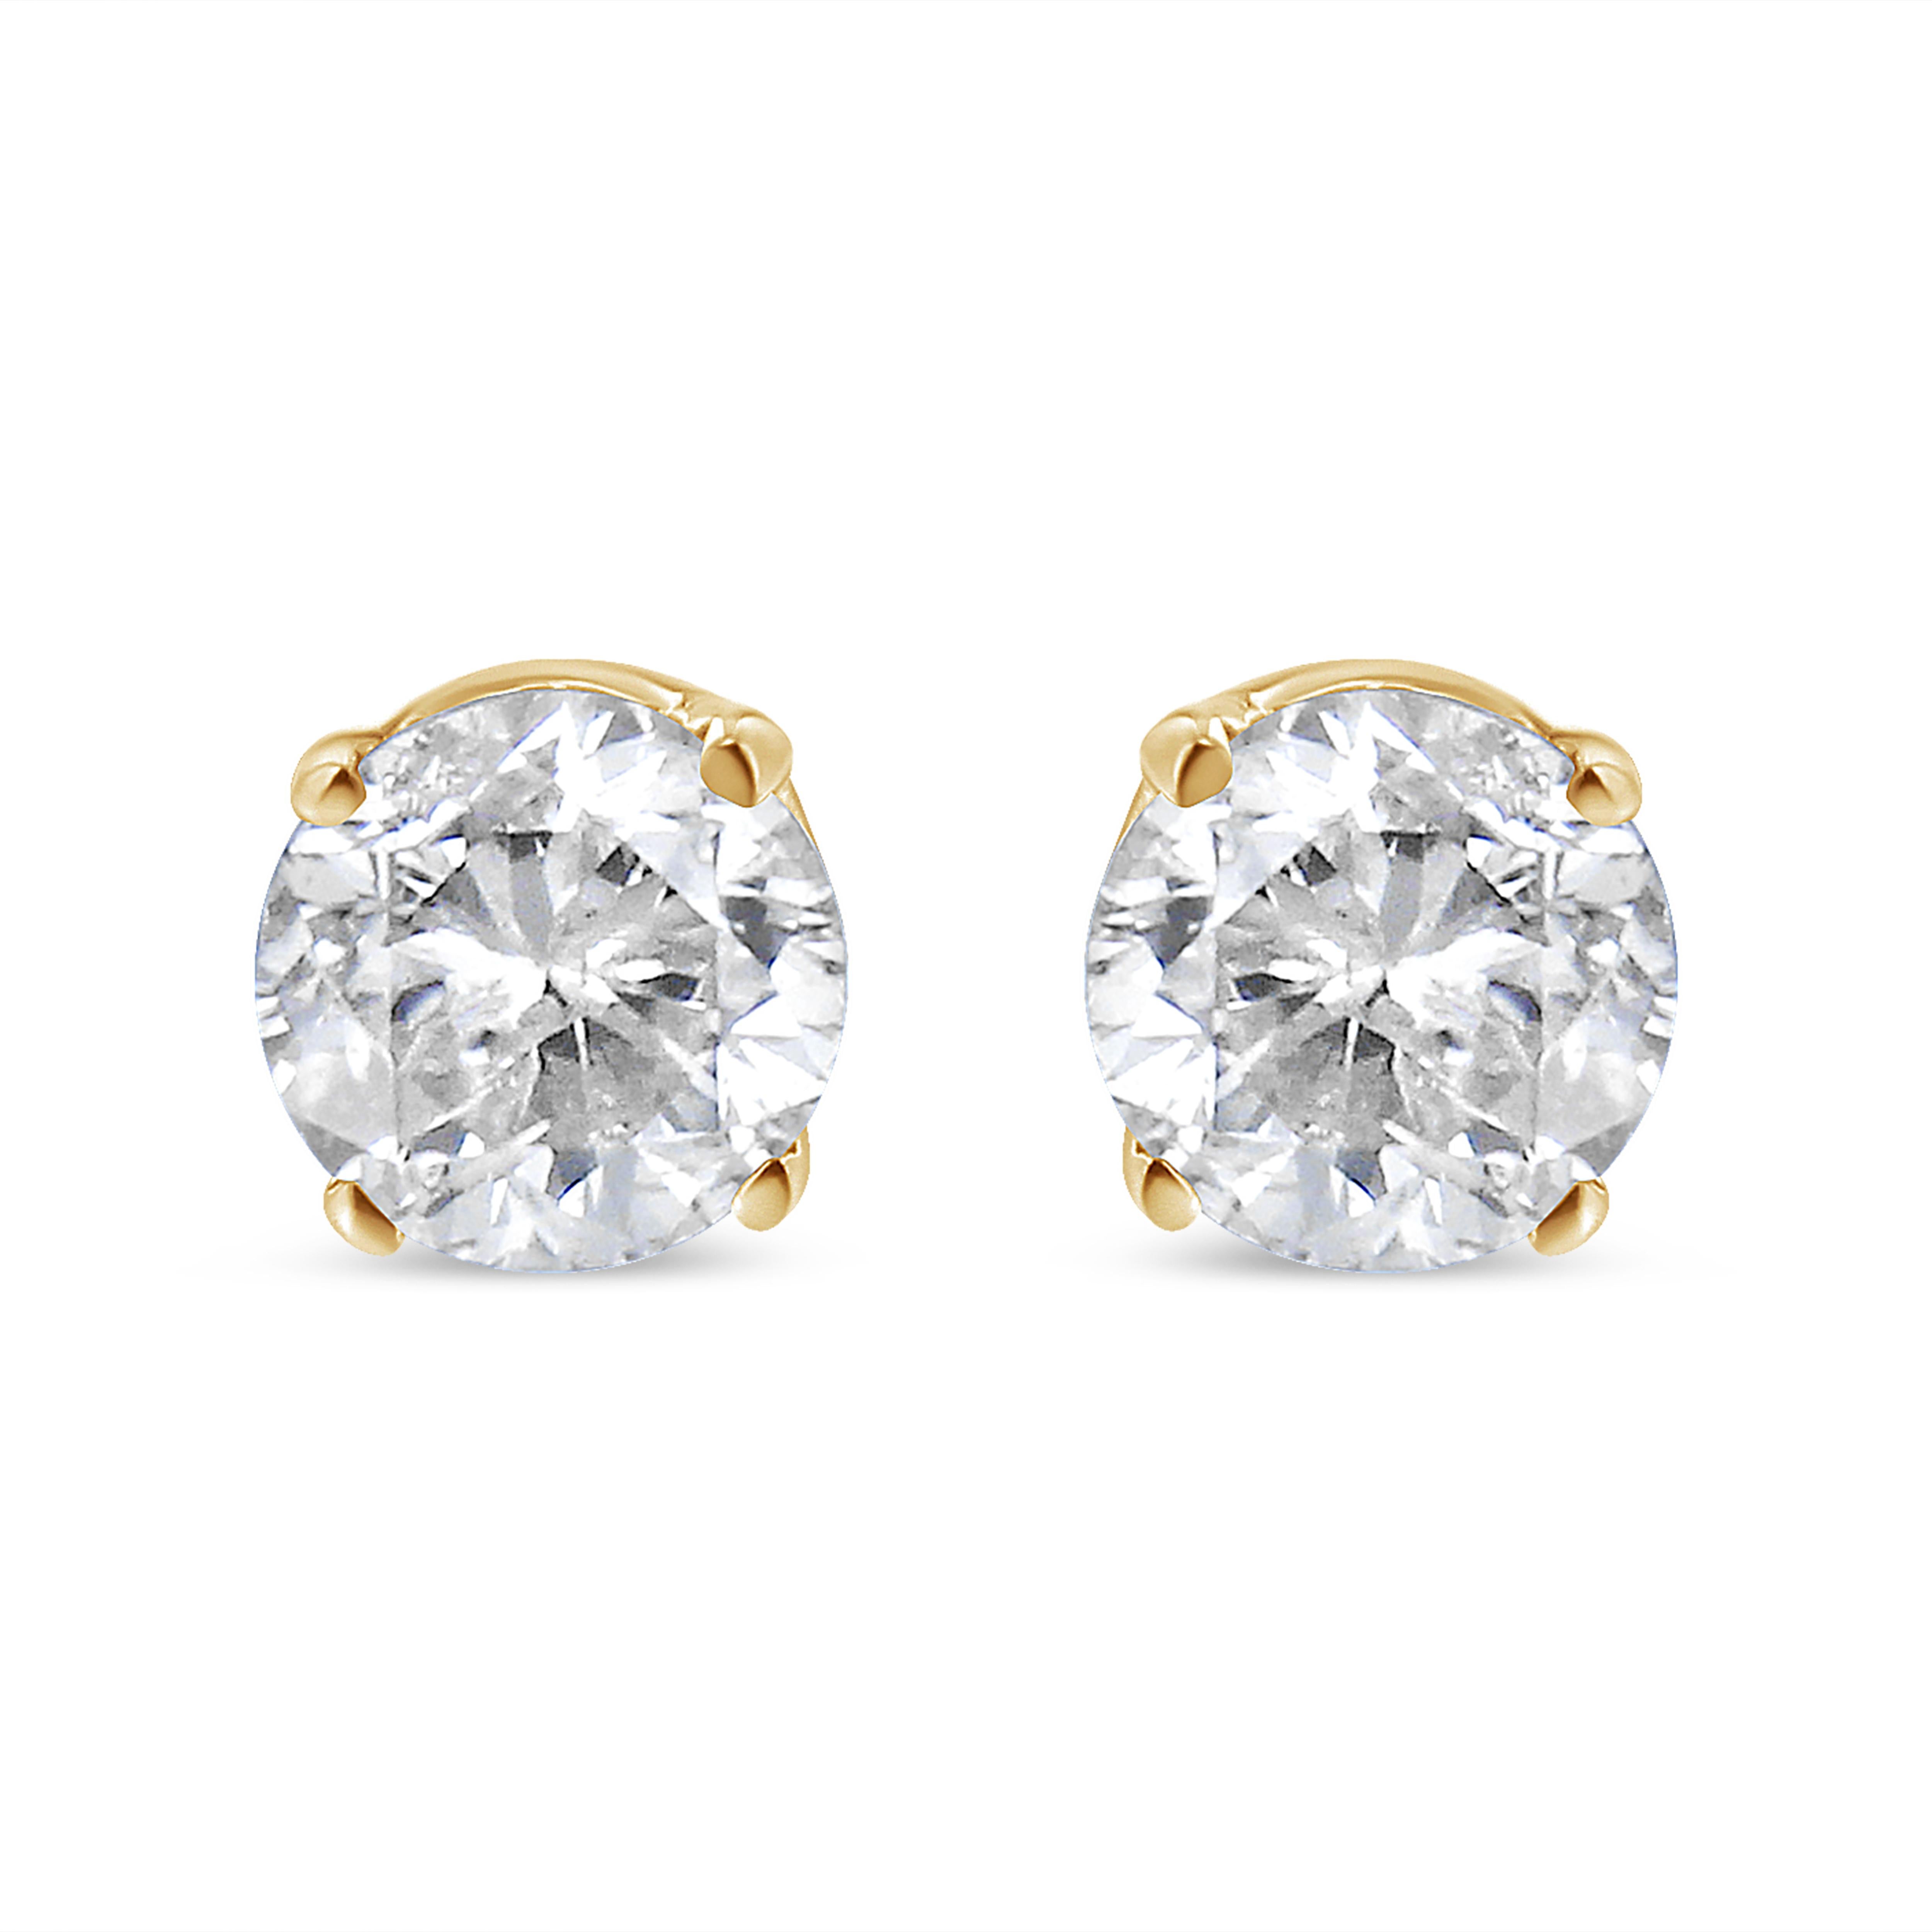 Two gorgeous white diamonds sit in a prong setting on these sparkling stud earrings. Crafted in 14k yellow, these diamond stud earrings feature a high polish finish. These stunning gold earrings feature 0.33 carats of diamonds, and the prong